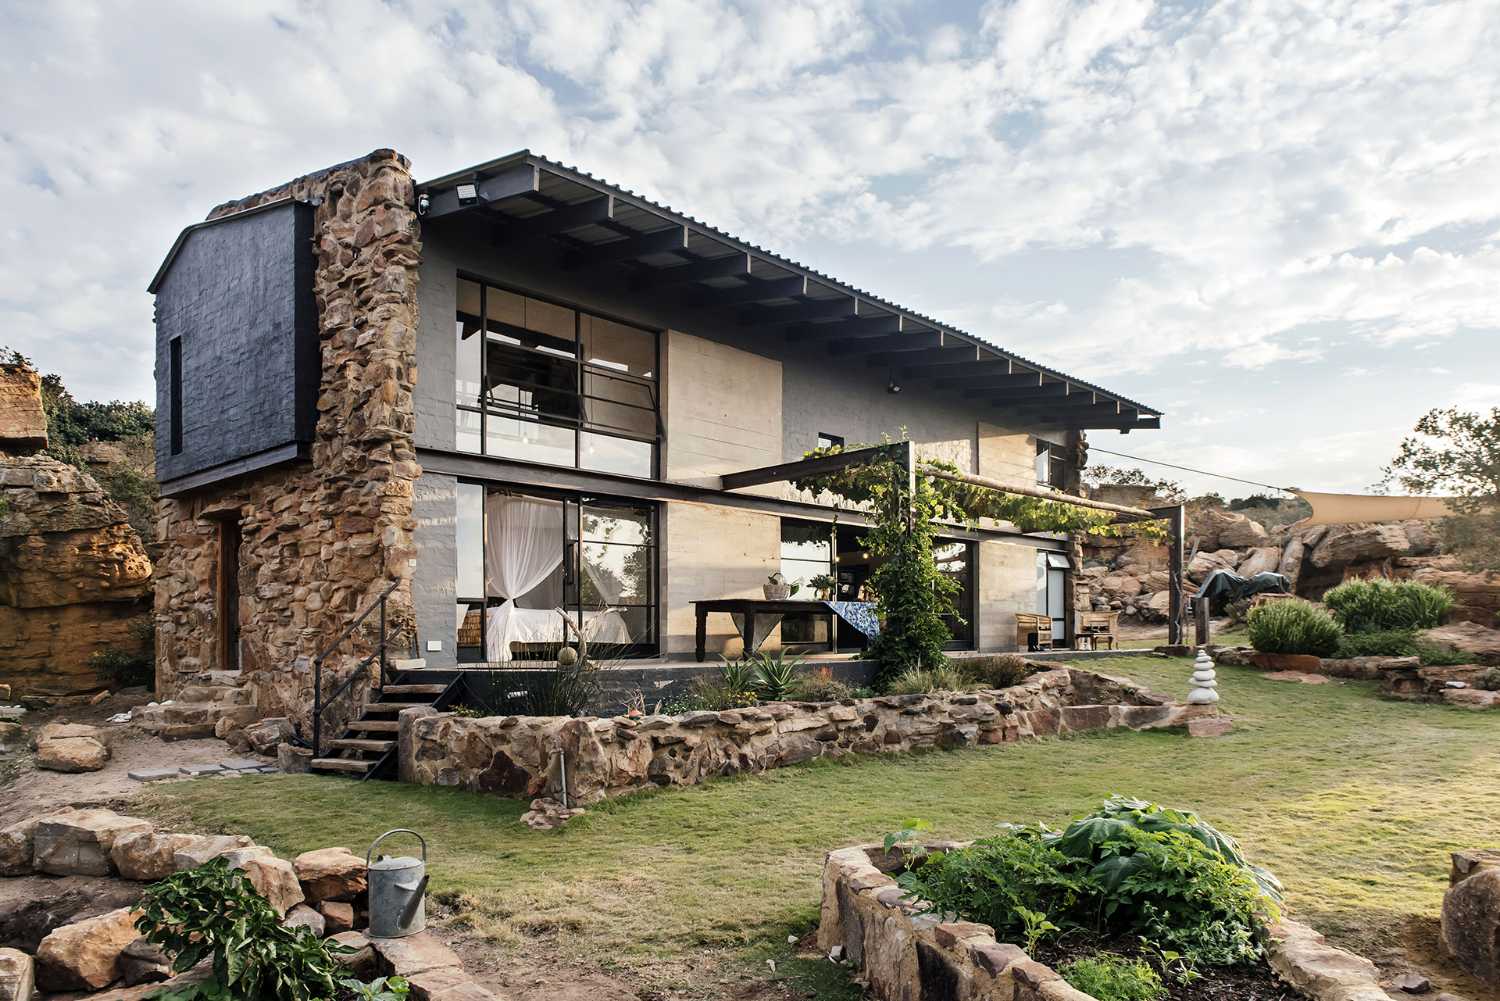 A stony façade for Cottage Rock, so you can climb the walls of your own home